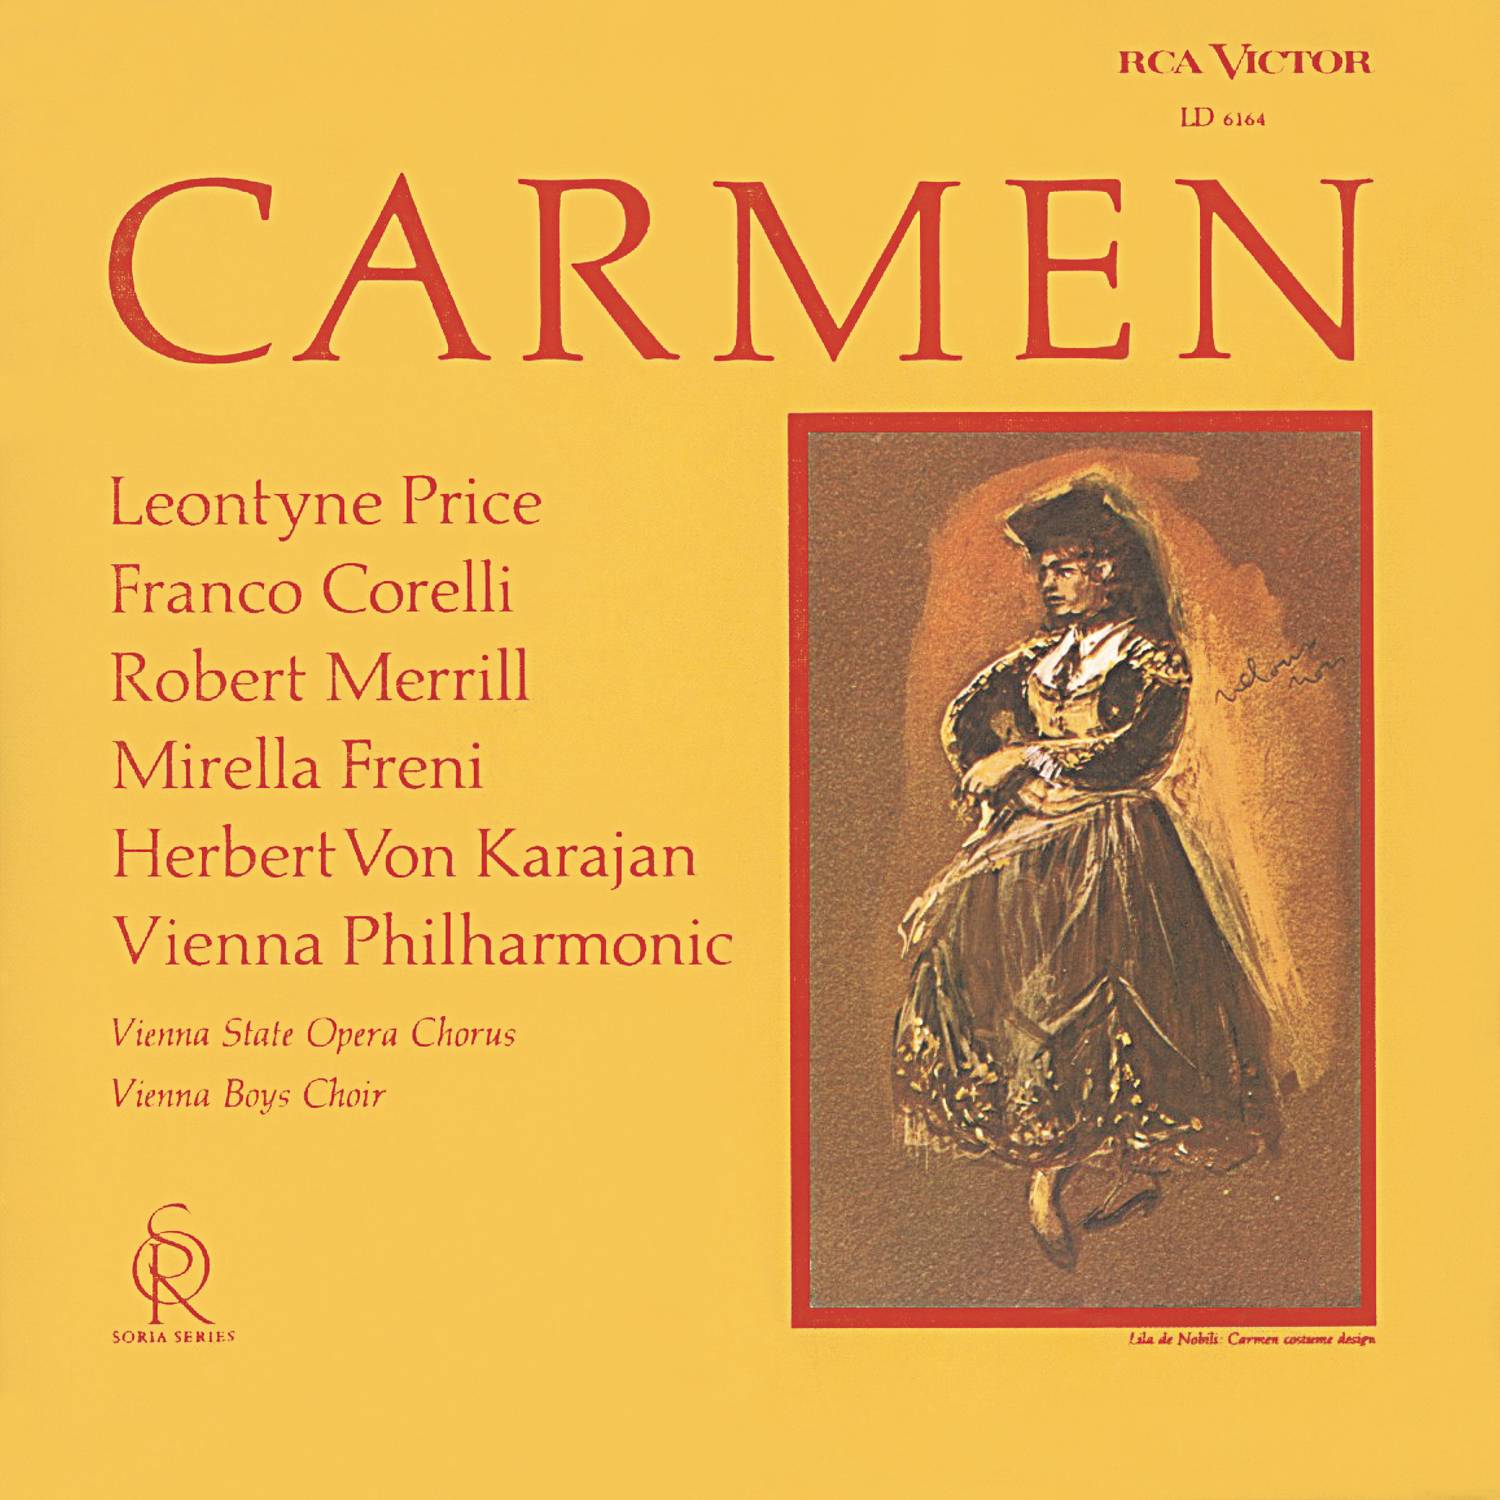 Carmen (Remastered): Act III - Entr'acte (2008 SACD Remastered)